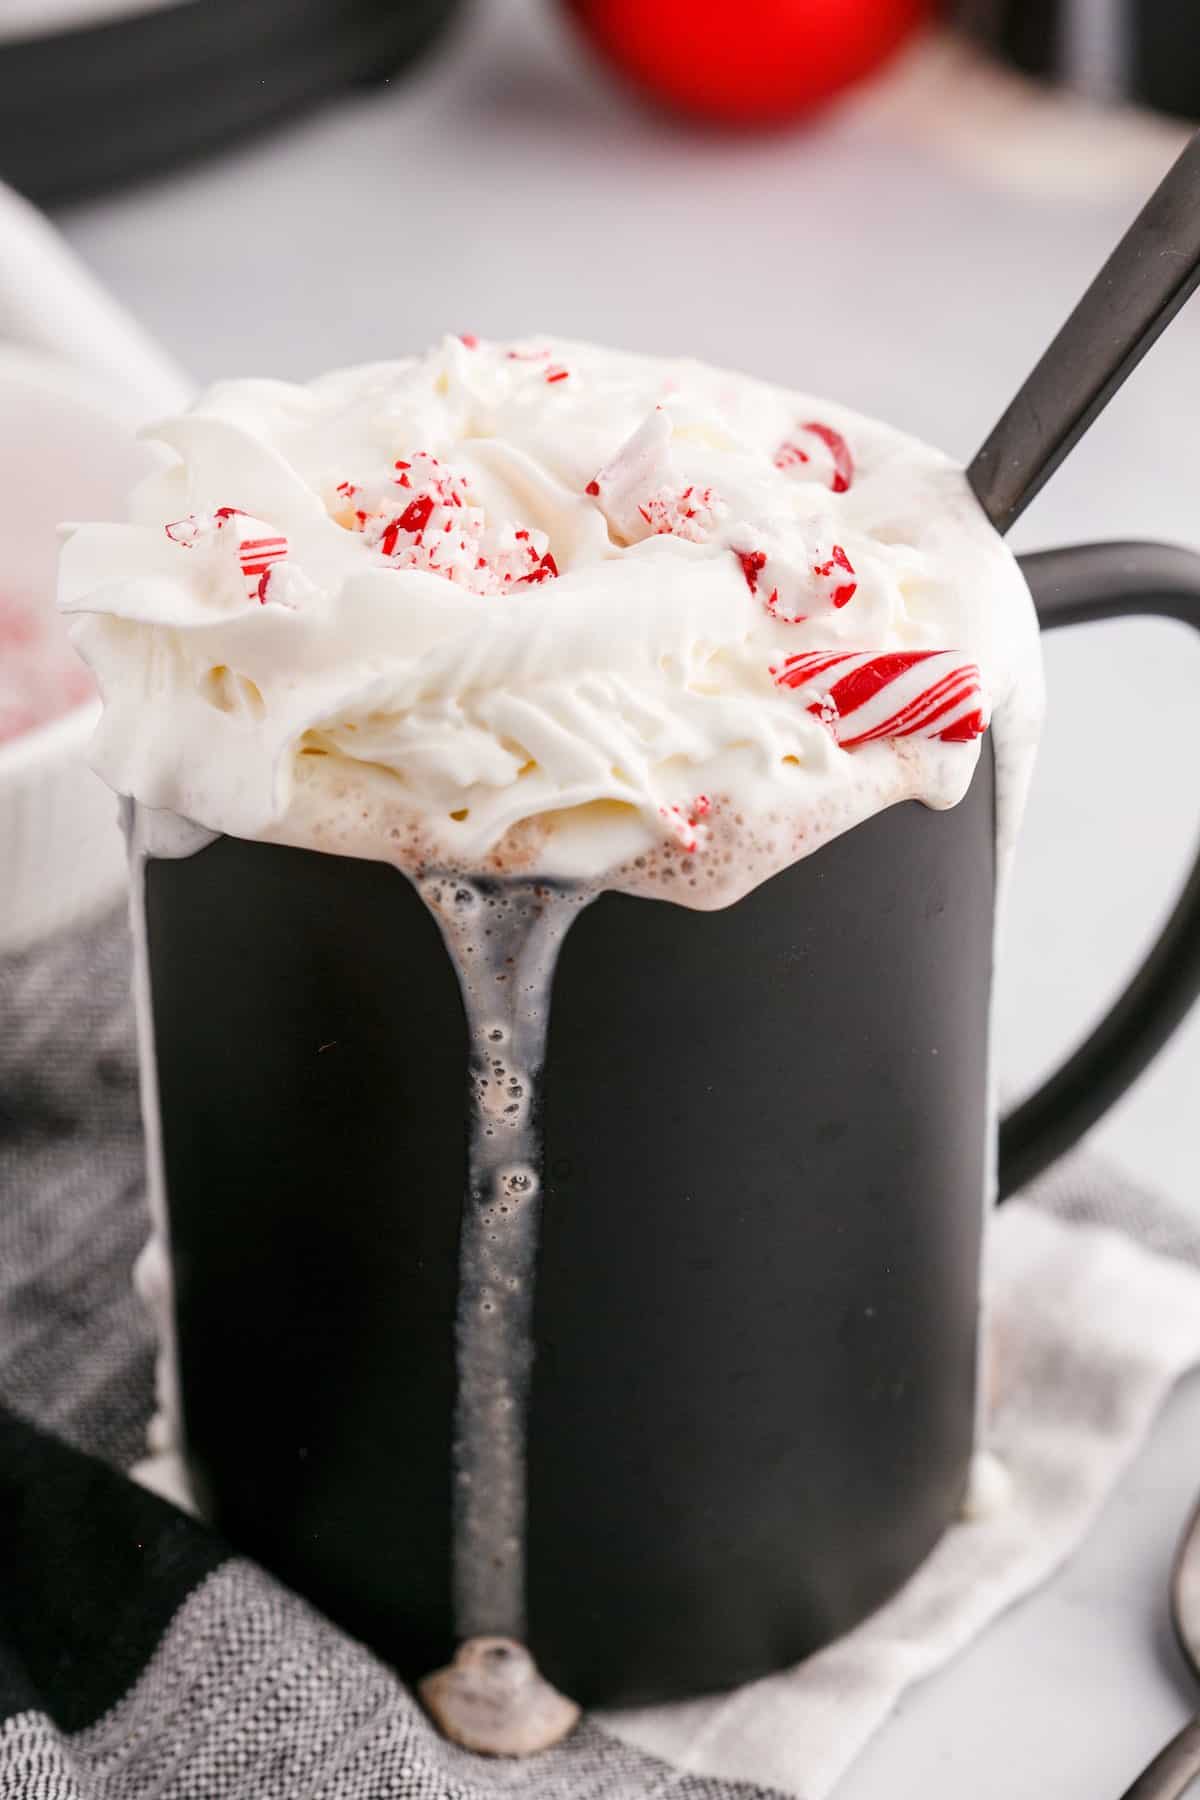 Whipped cream topped hot chocolate with peppermint pieces crumbled on top.